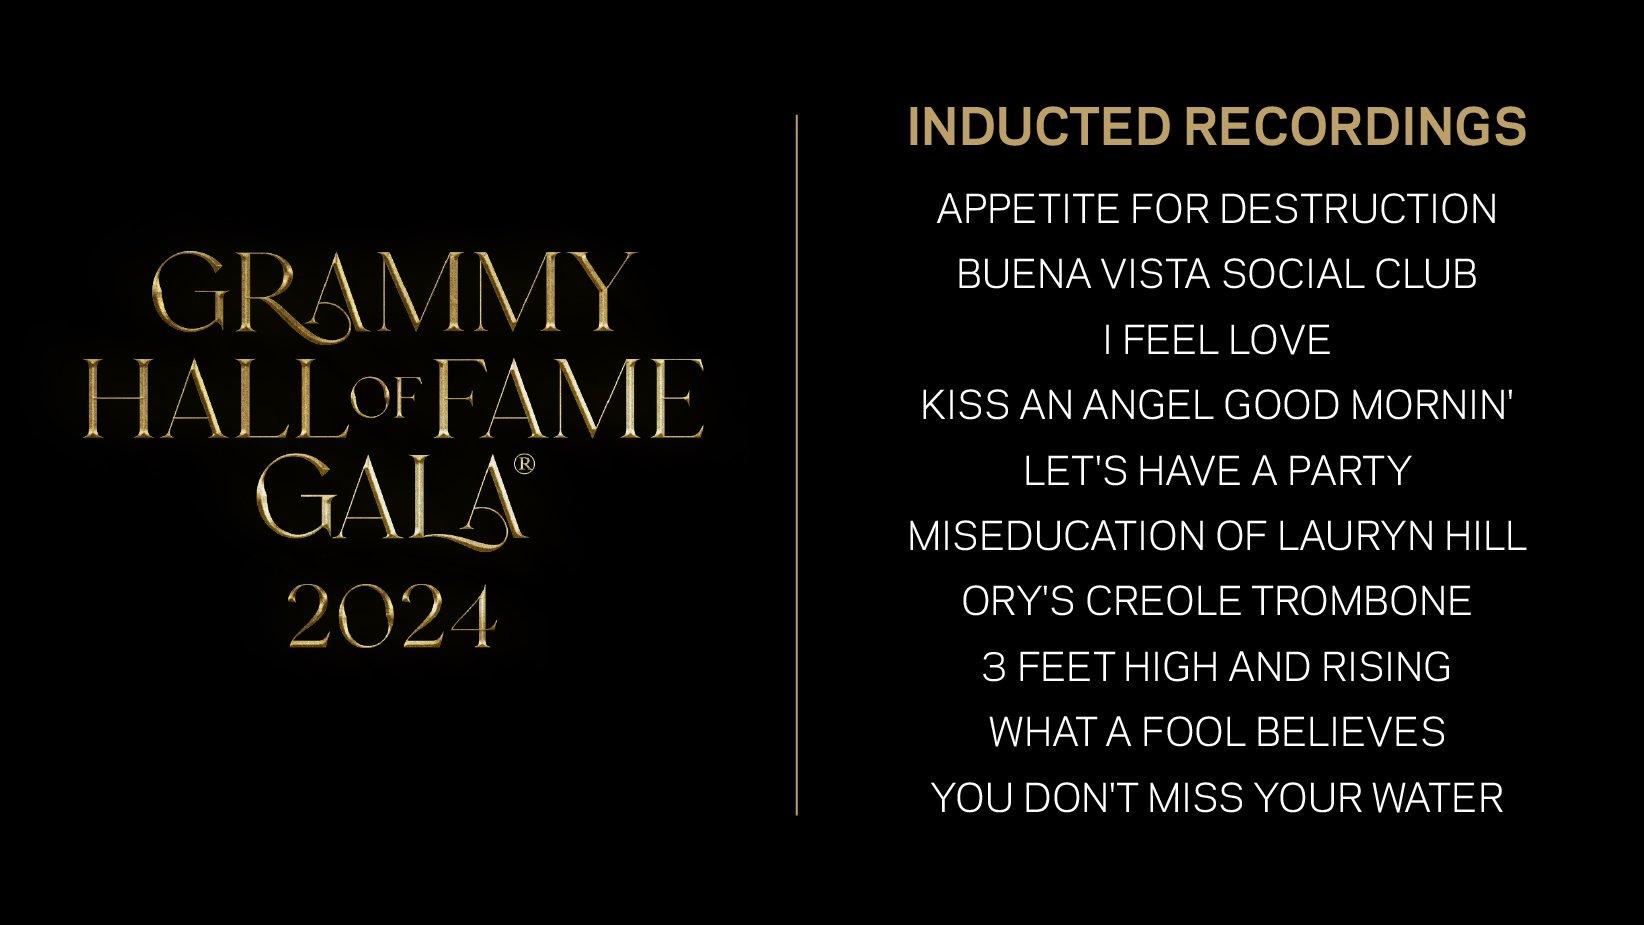 The Recording Academy revealed the 2024 inducted recordings to the distinguished GRAMMY Hall Of Fame on its 50th anniversary. Graphic shows all of the 10 recordings newly inducted into the GRAMMY Hall of Fame.